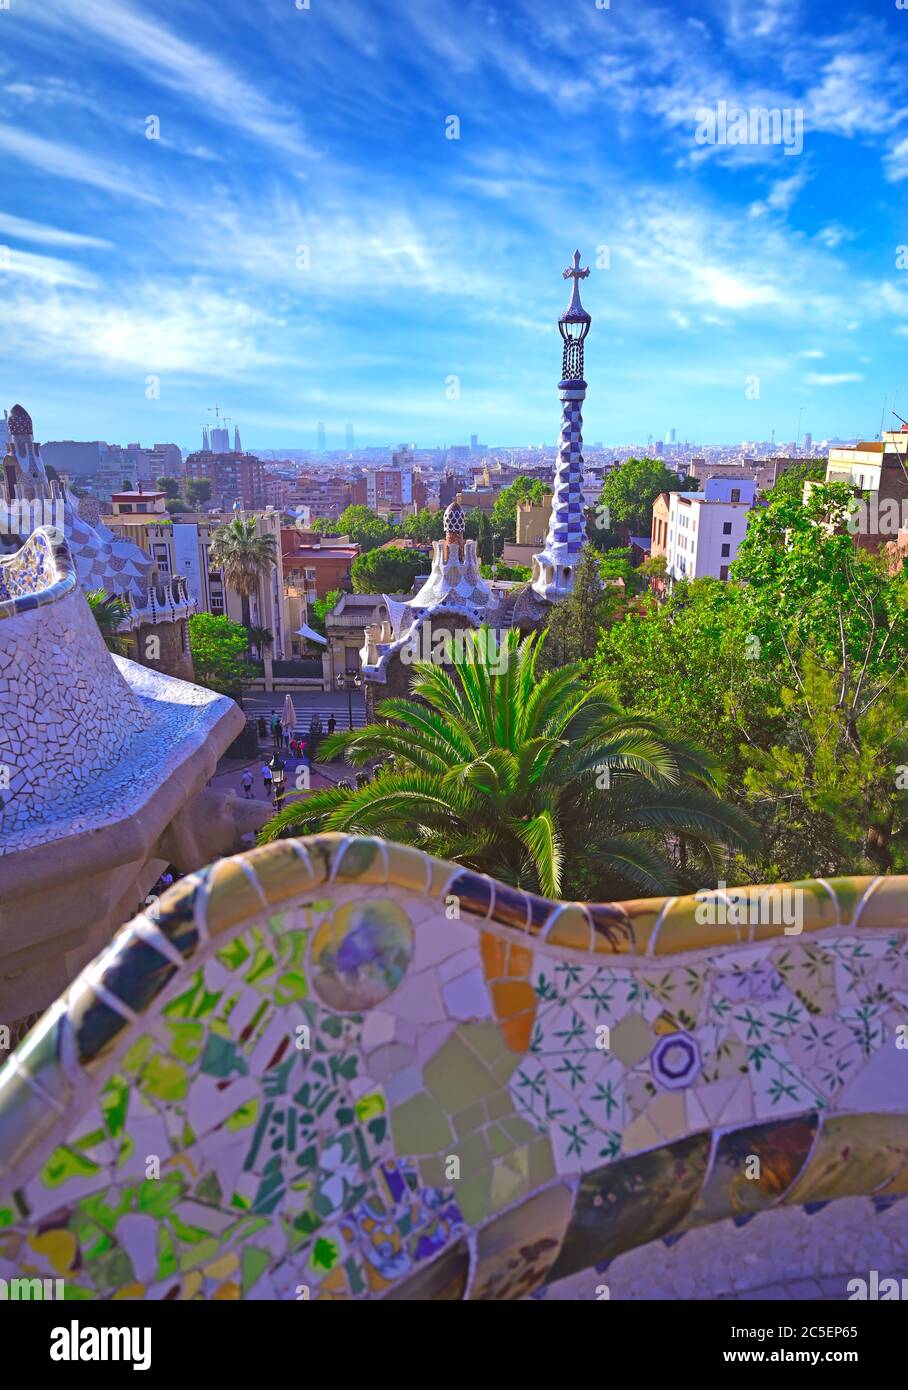 June 16, 2019 - Barcelona, Spain - Park Guell (1914) is the famous architectural town art designed by Antoni Gaudi located in Barcelona, Spain. Stock Photo